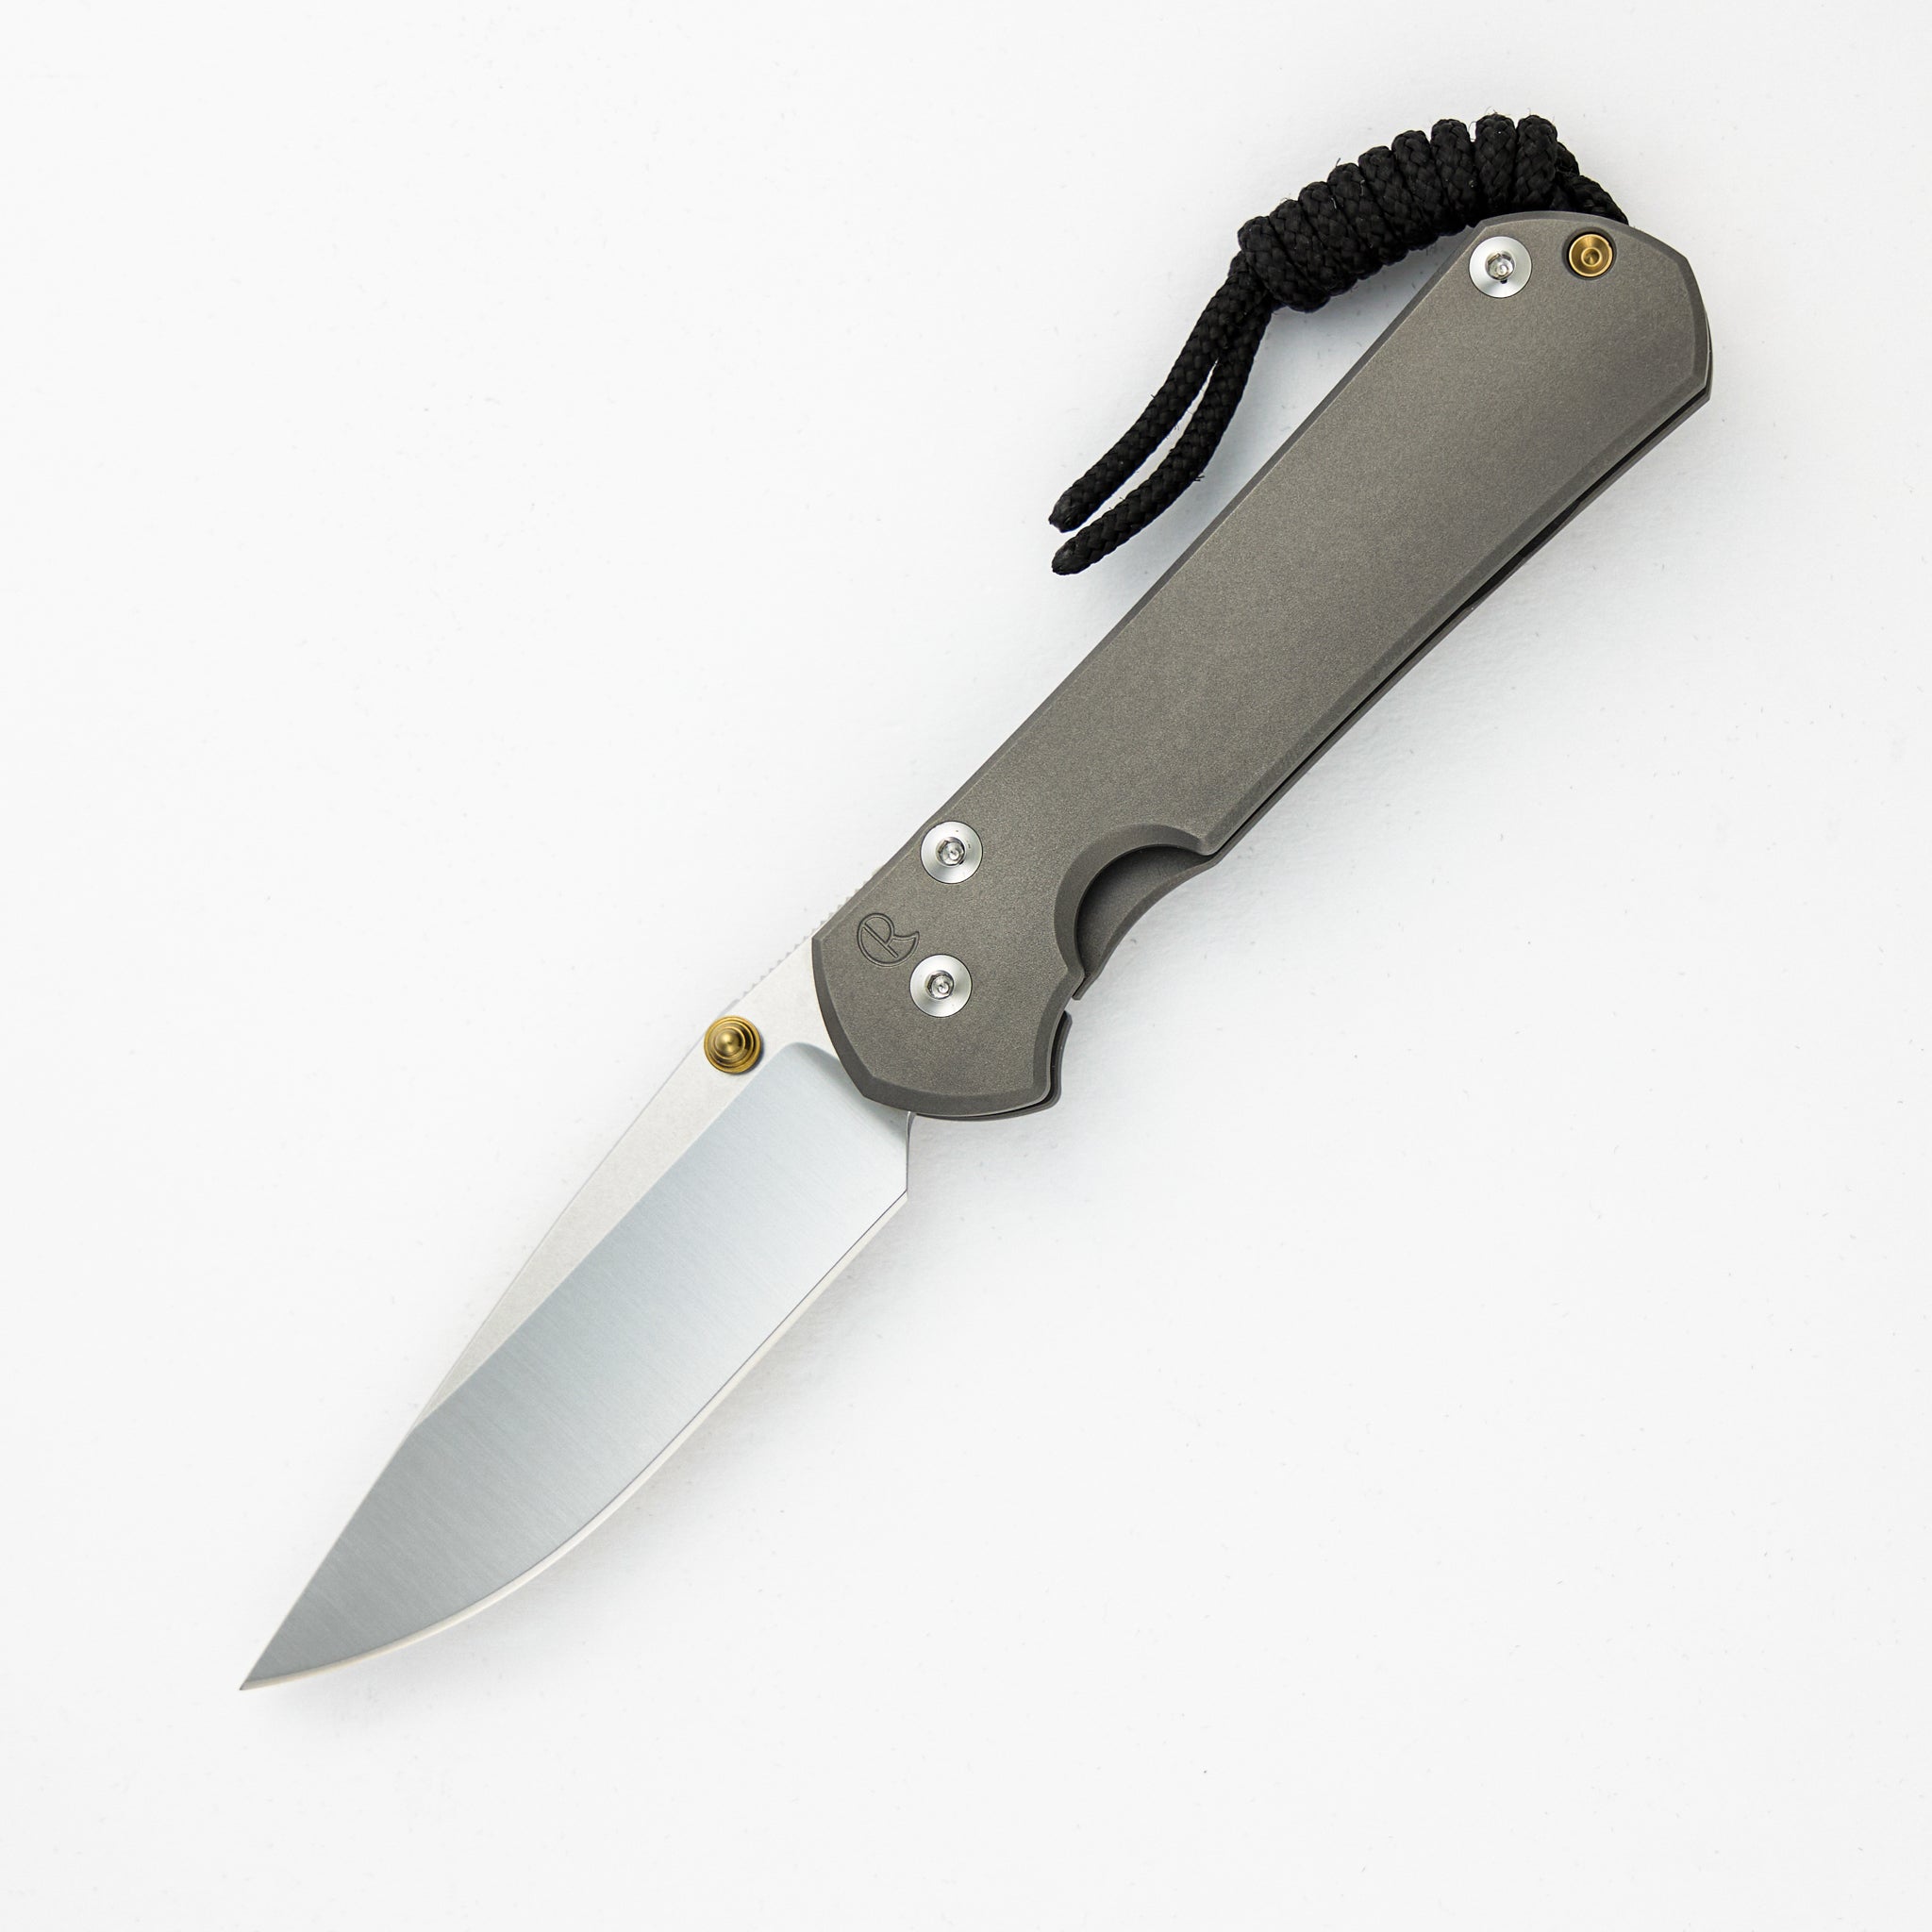 Chris Reeve Small Sebenza 31 - Polished Drop Point CPM MagnaCut Blade - Glass Blasted - Gold Double Thumb Lugs